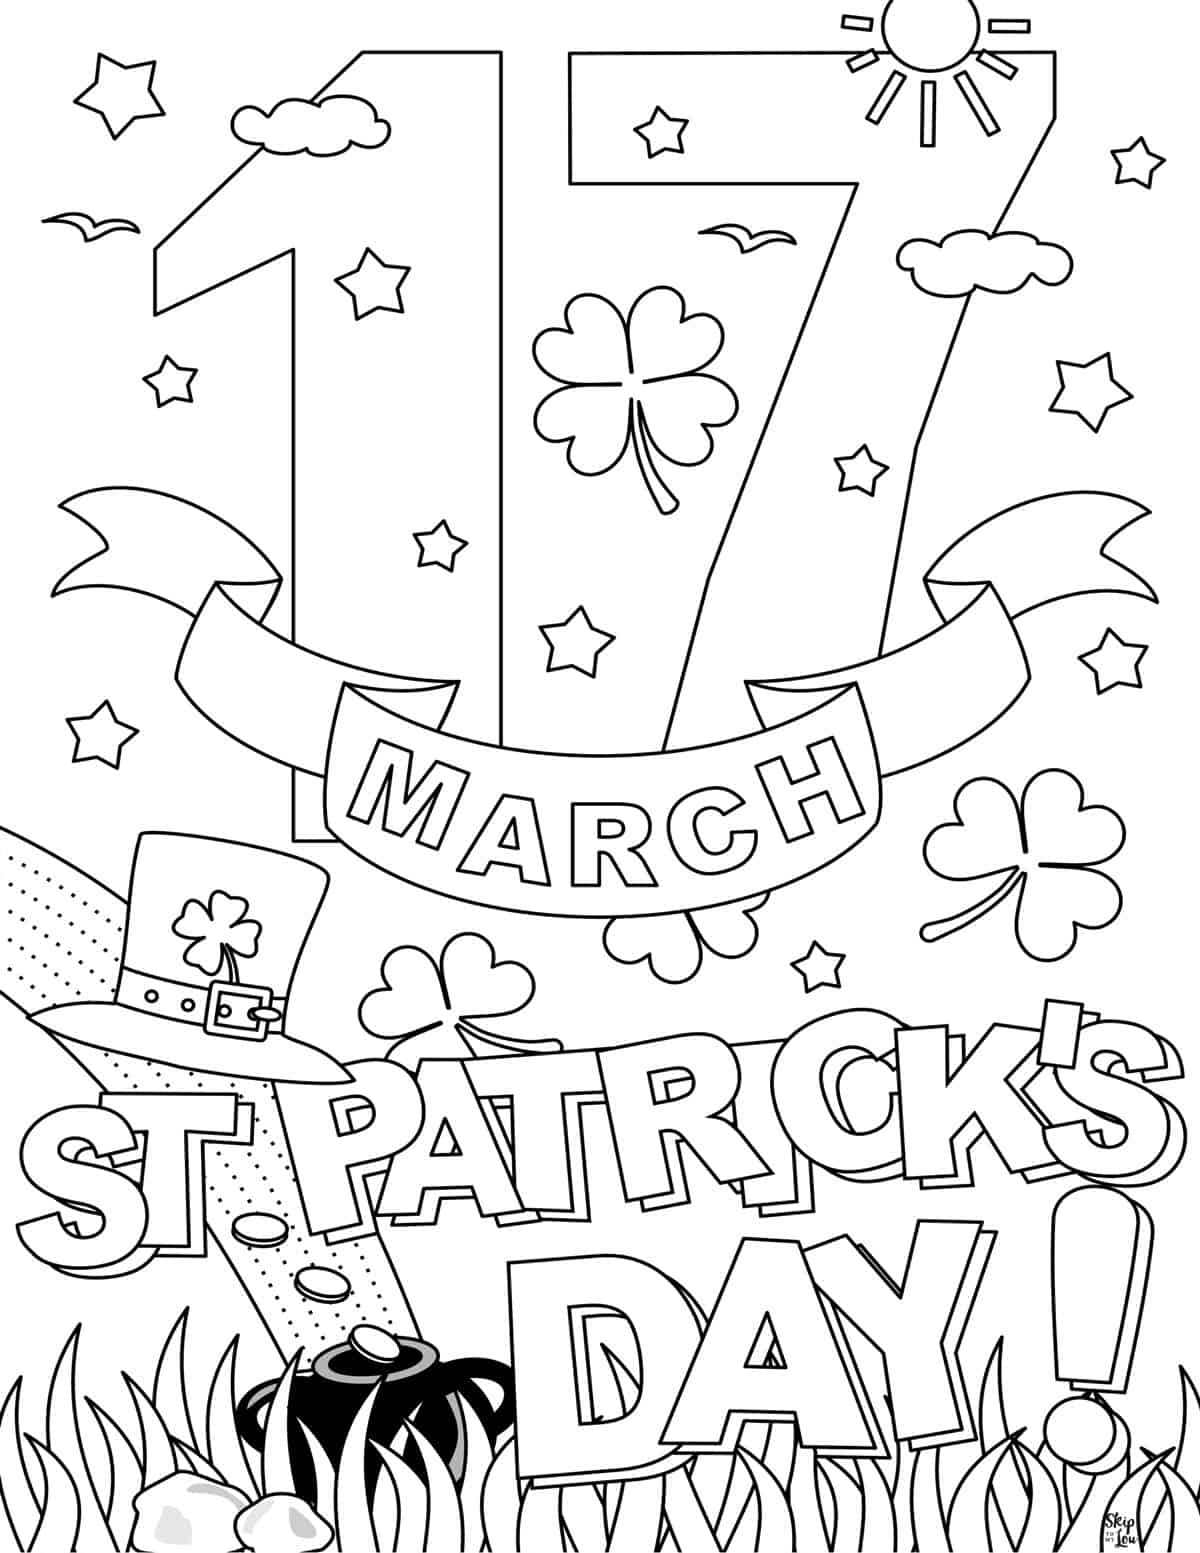 march 17 st patricks day coloring page